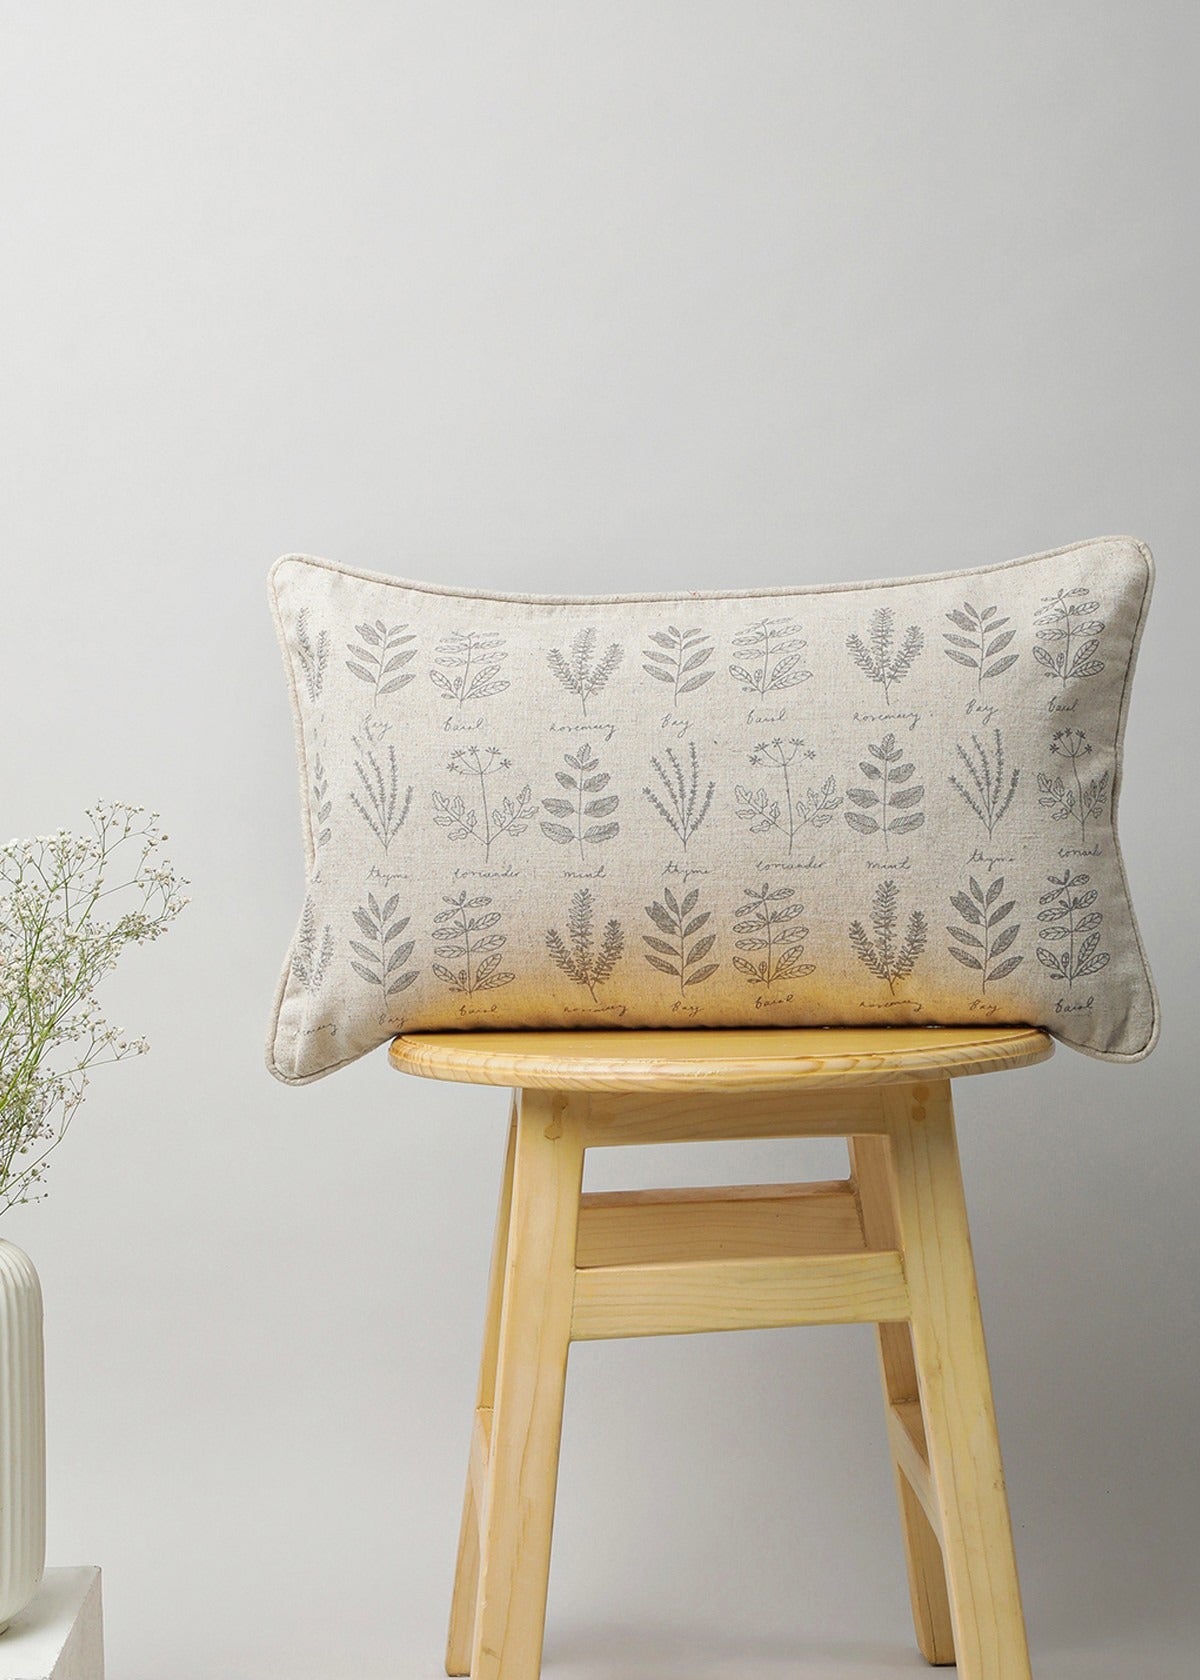 Vintage Herbs Printed Cotton Cushion Cover - Beige